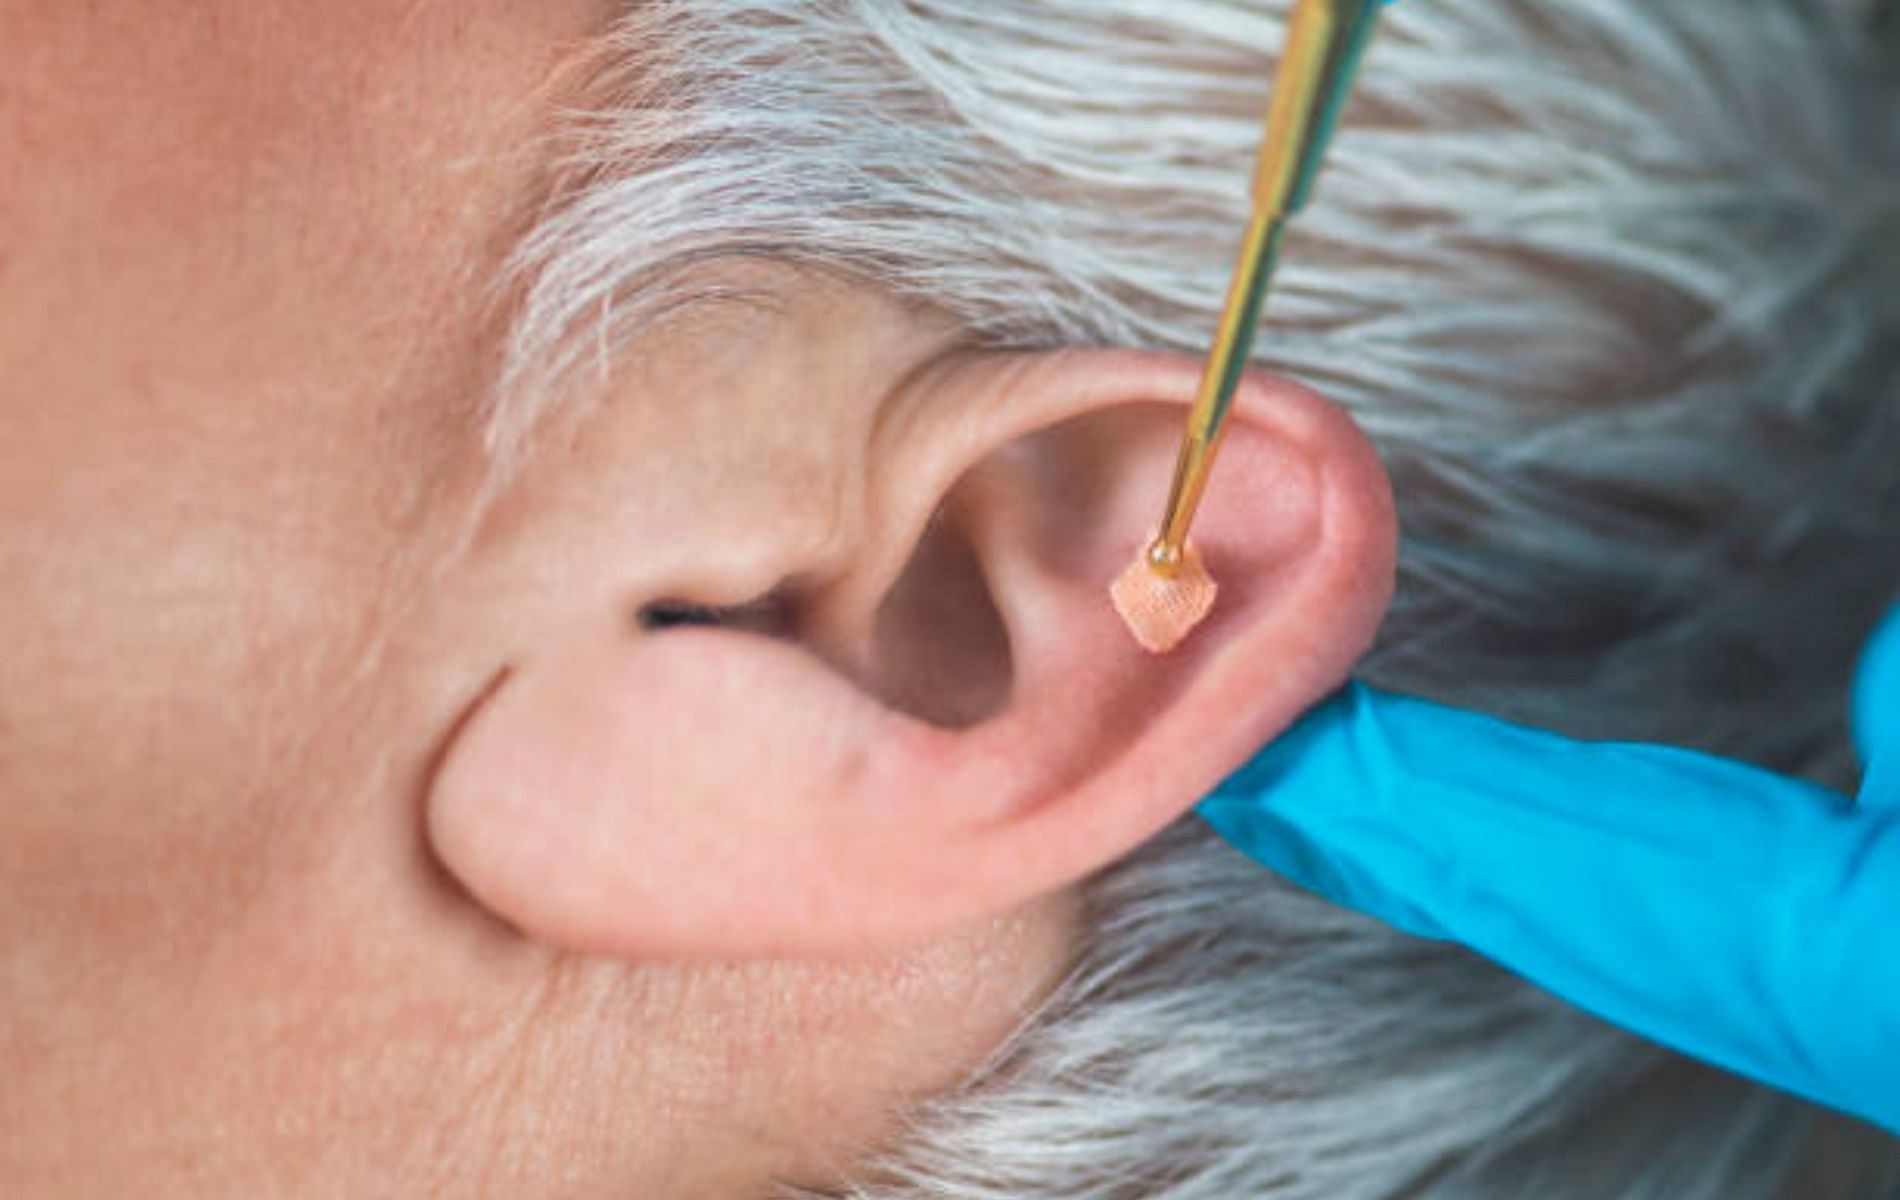 Ear seeds can help with weight loss. (Image via iStockphoto)